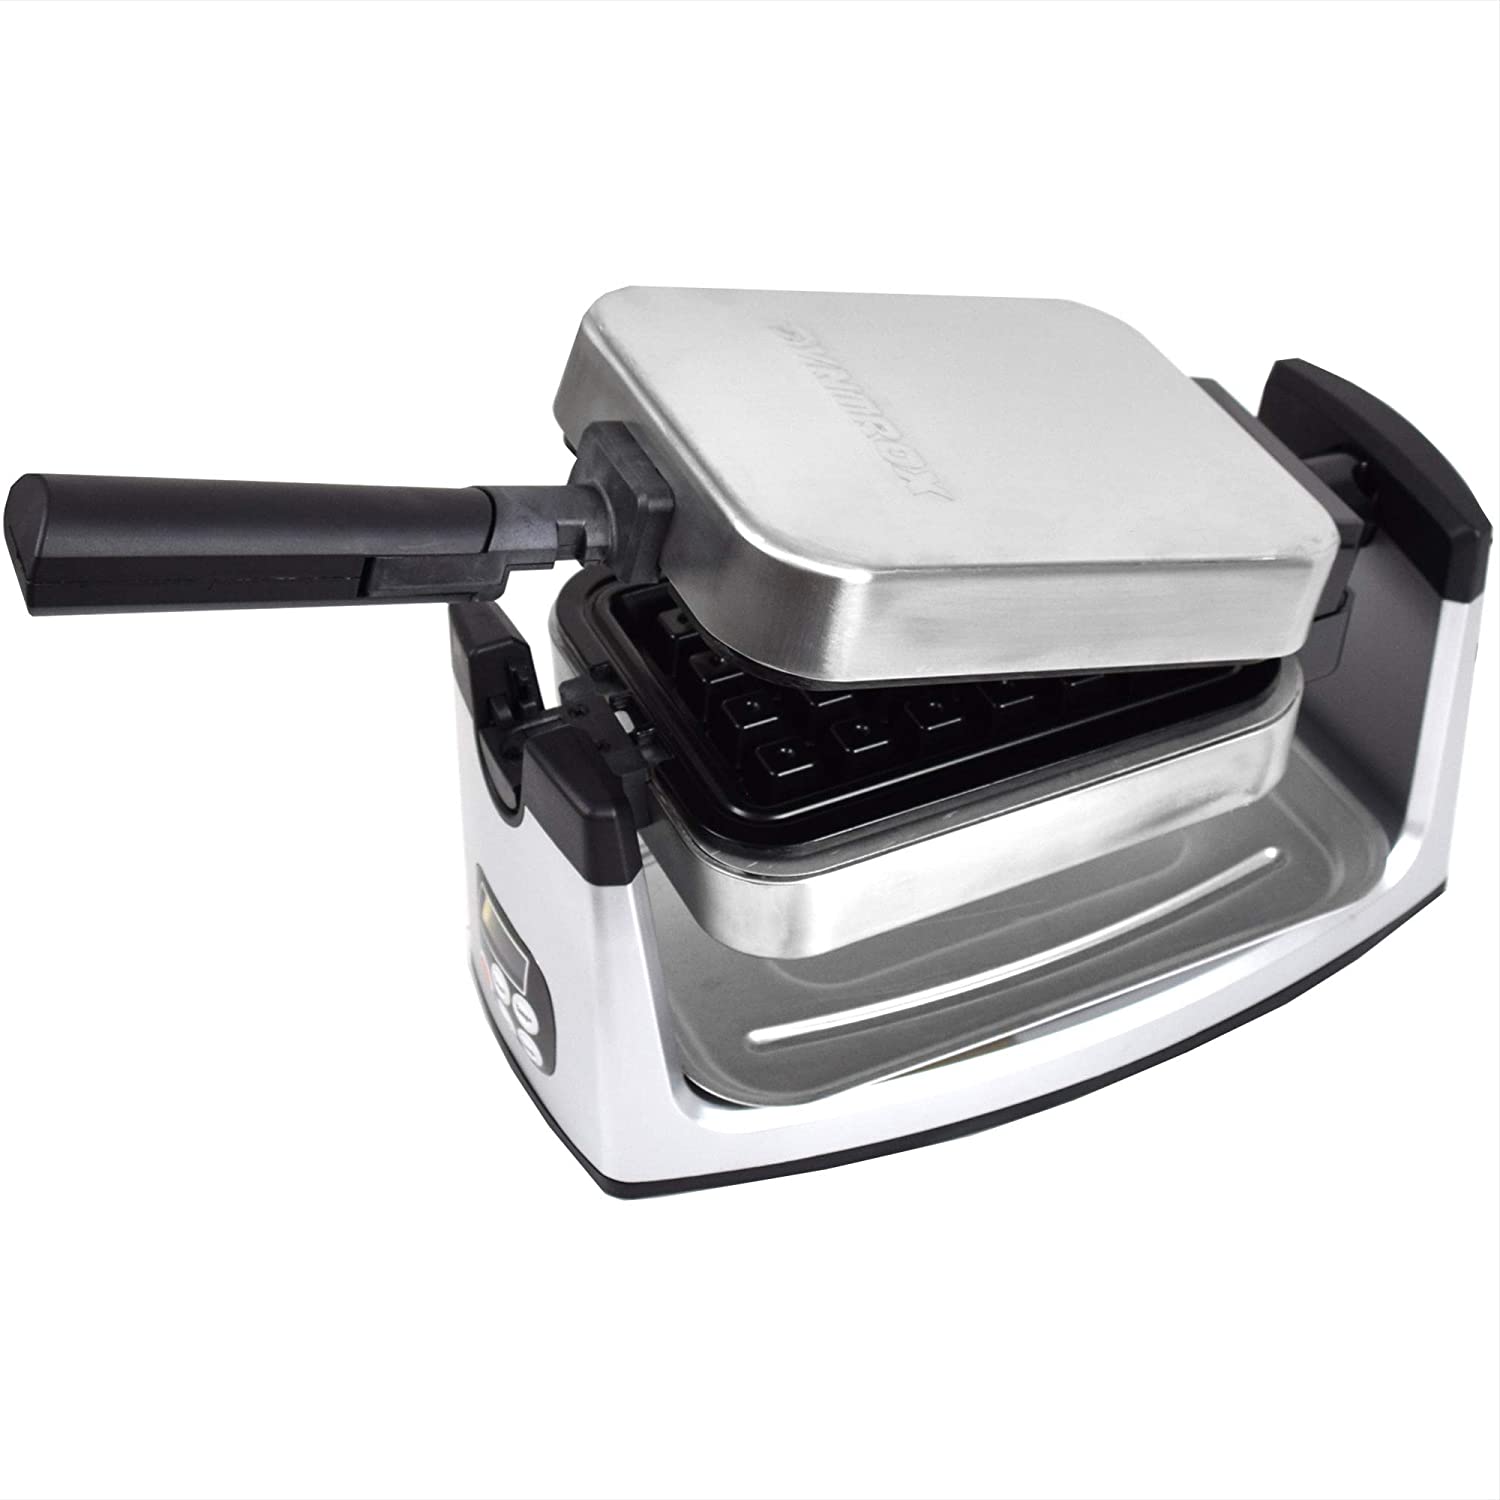 Syntrox Germany Digital Stainless Steel Rotating Waffle Iron With Removable